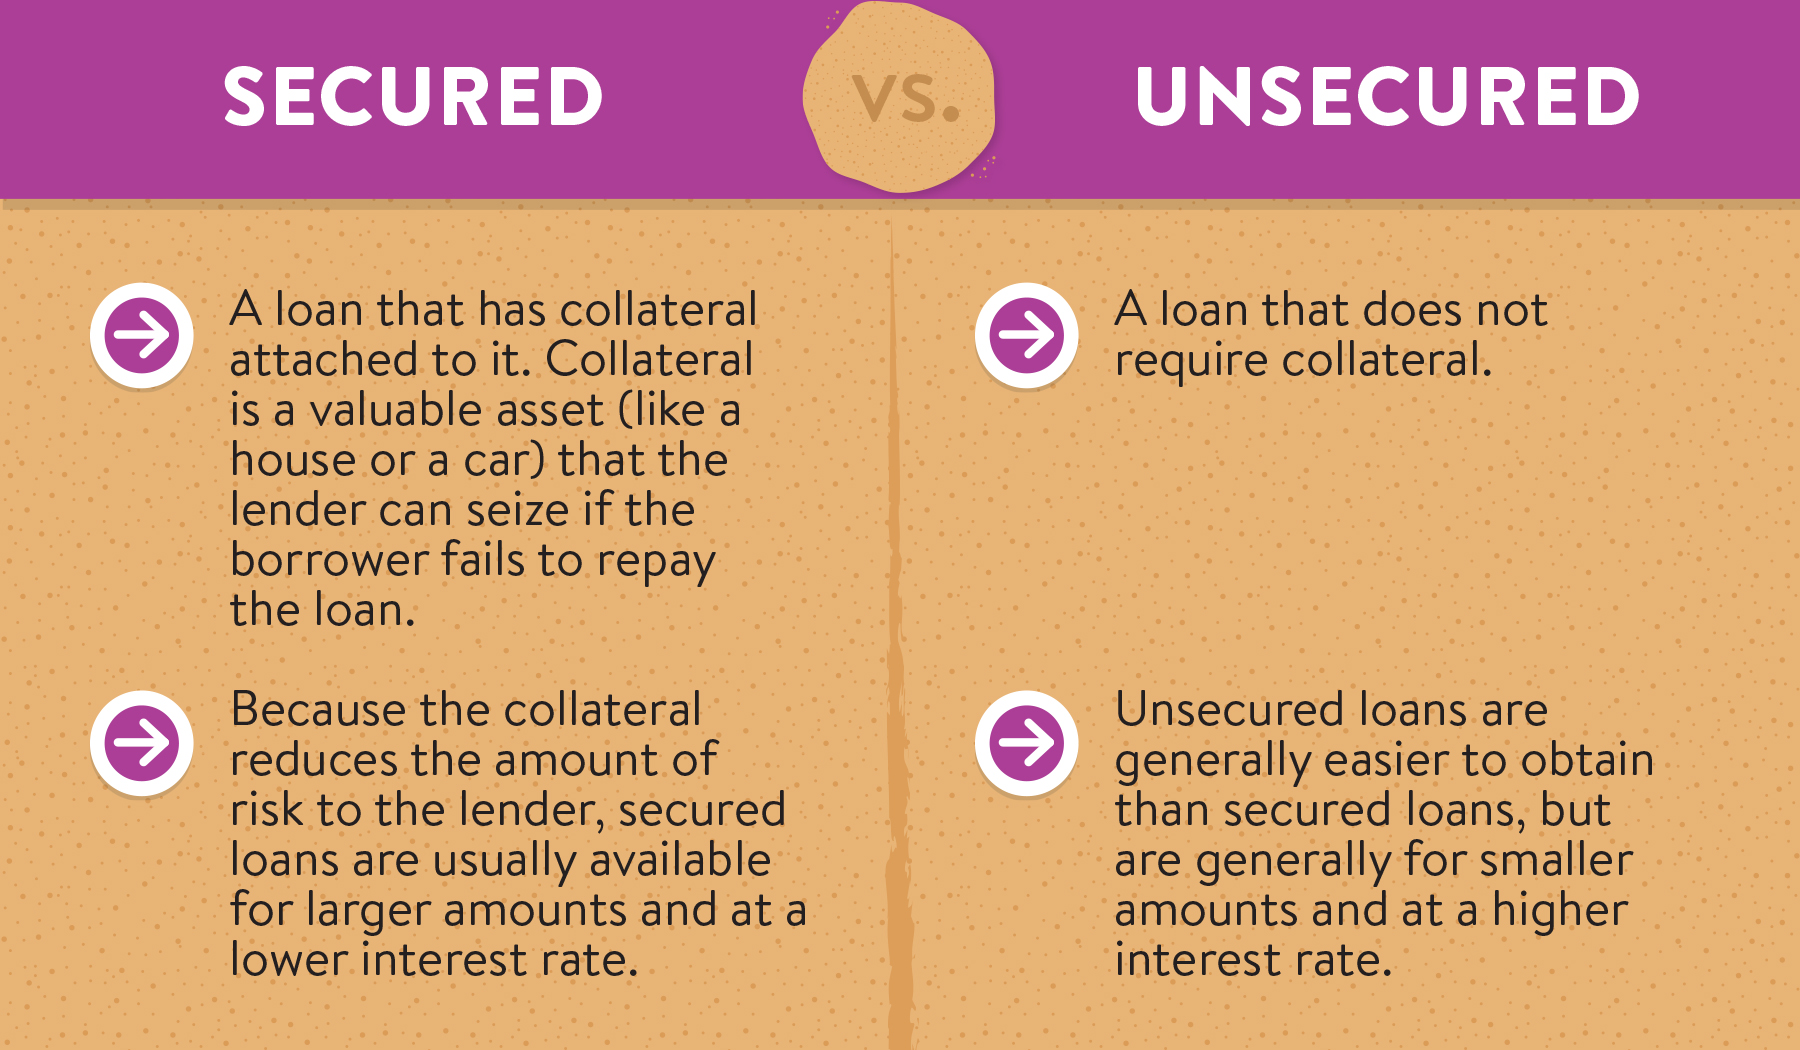 Loan Basics: Secured Loans have collateral attached to them, whereas unsecured loans do not.